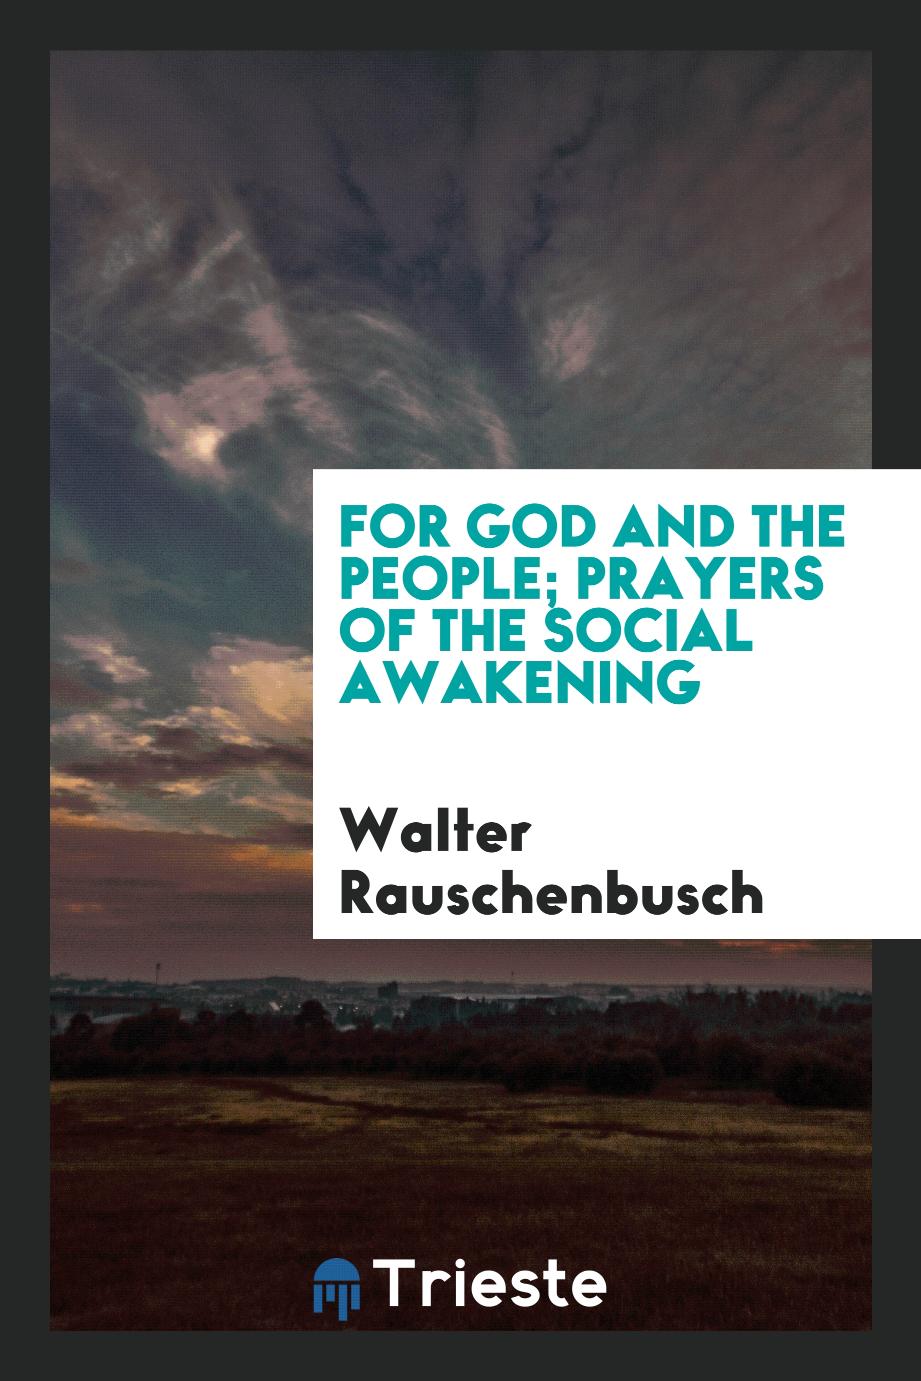 Walter Rauschenbusch - For God and the people; prayers of the social awakening